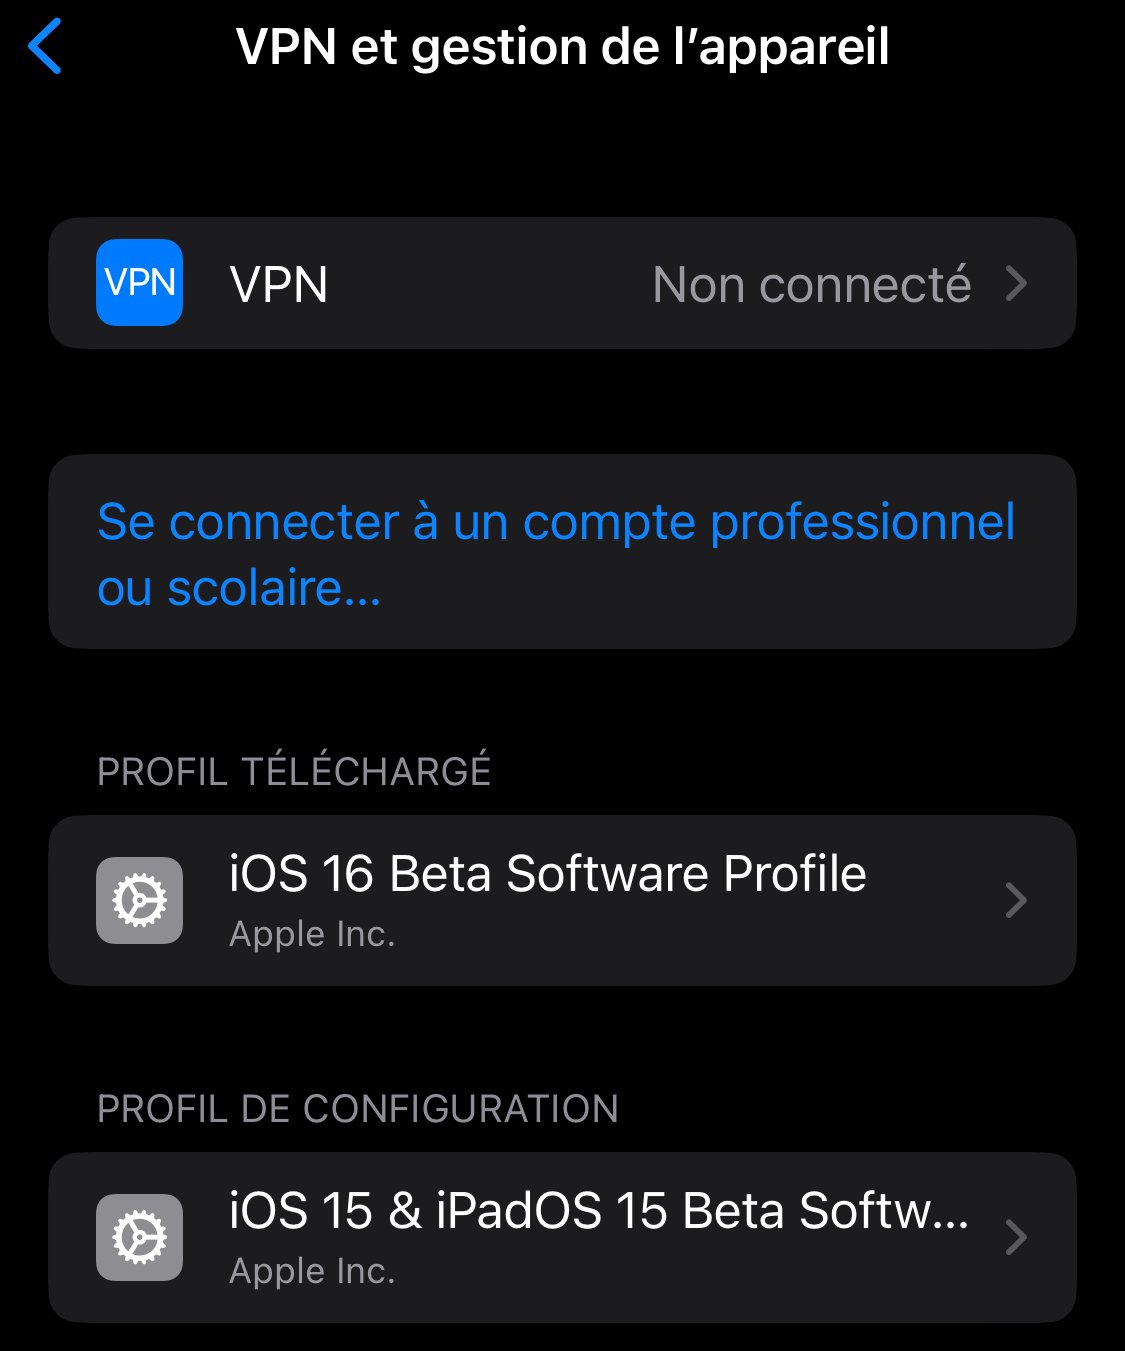 iOS 15 and 16 Beta Versions